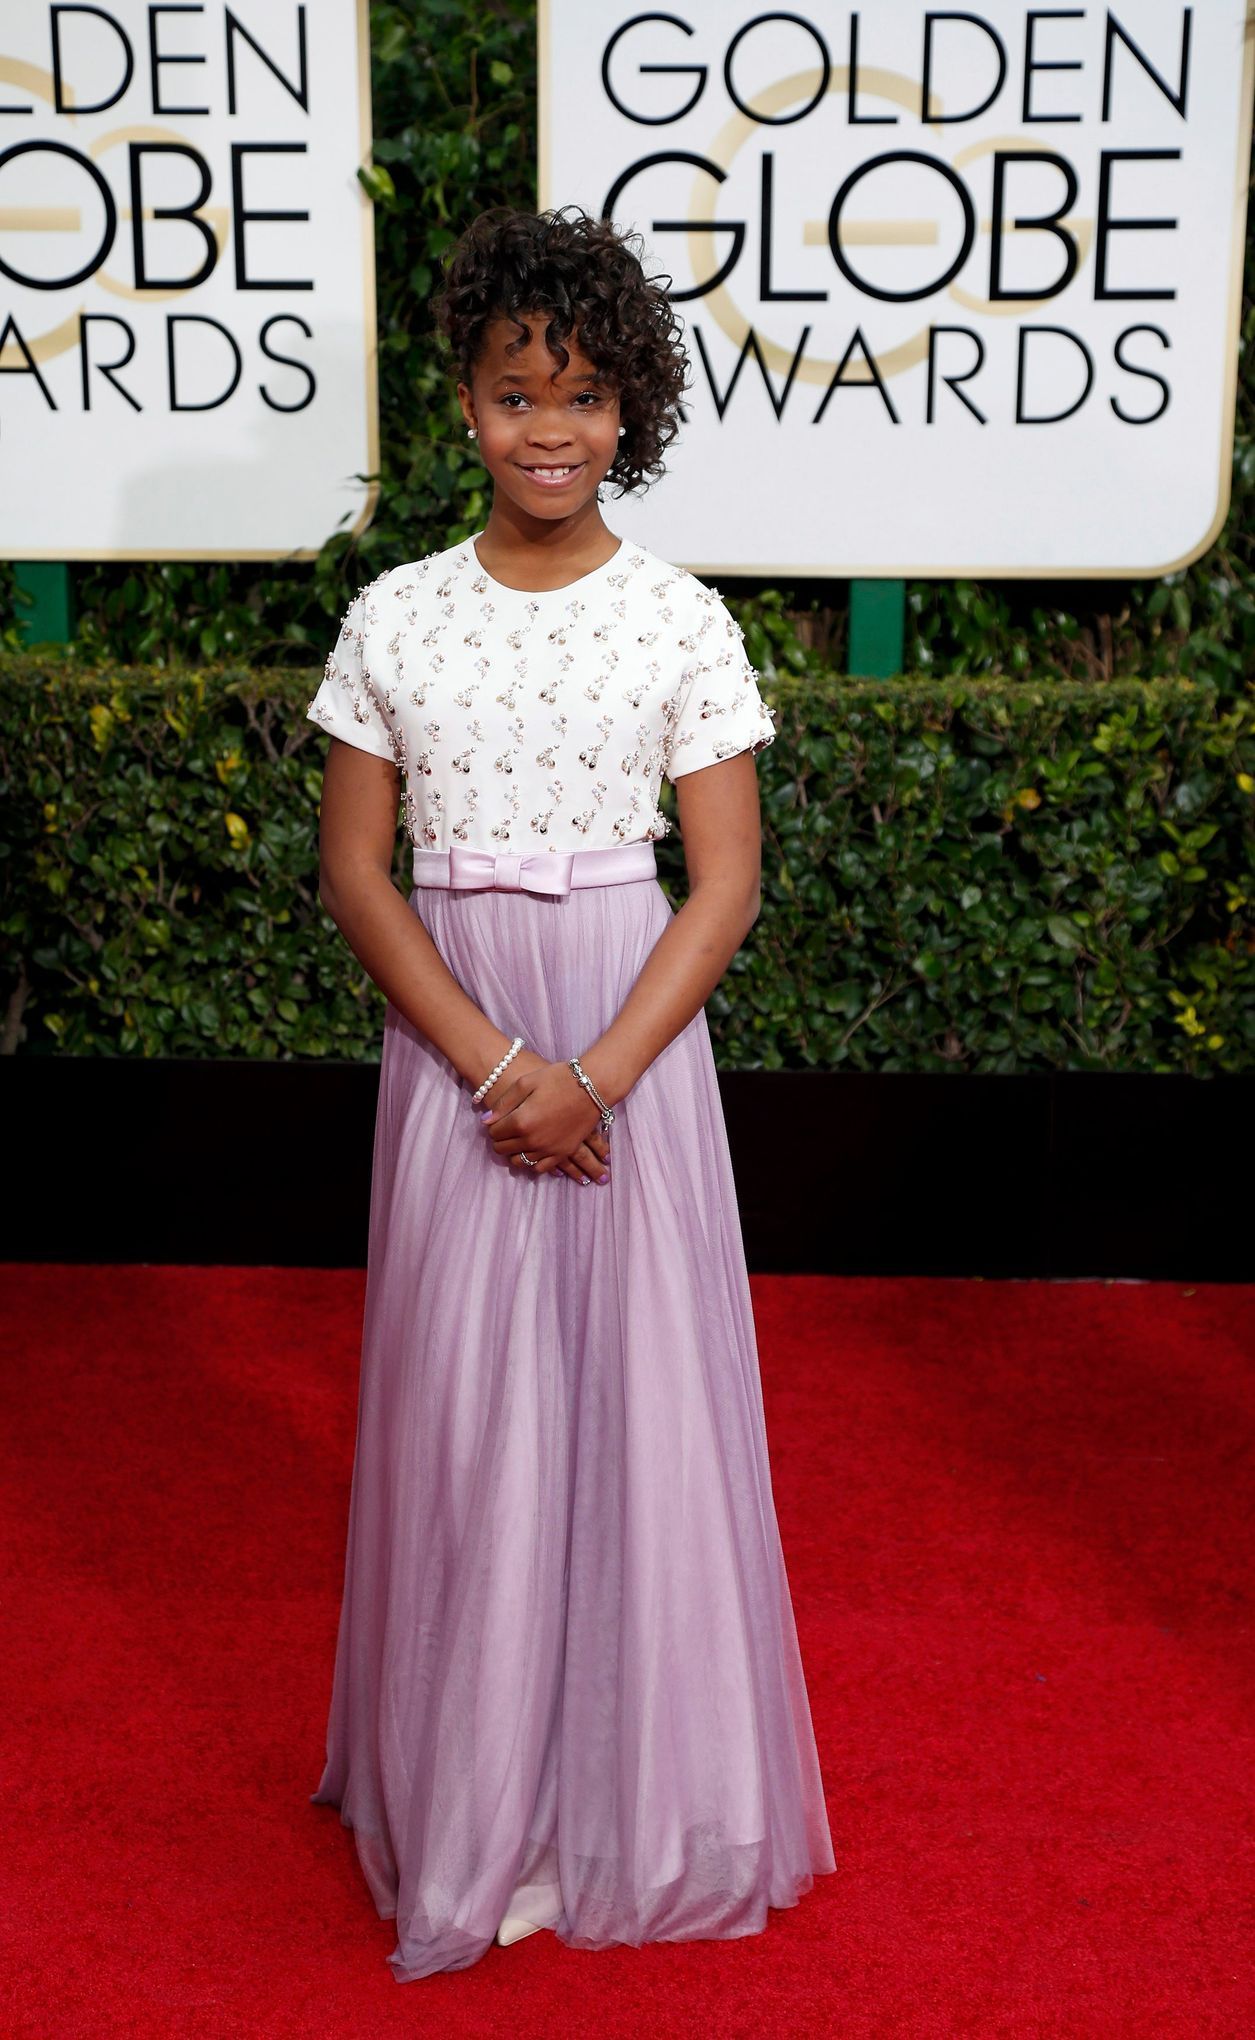 Quvenzhane Wallis arrives at the 72nd Golden Globe Awards in Beverly Hills